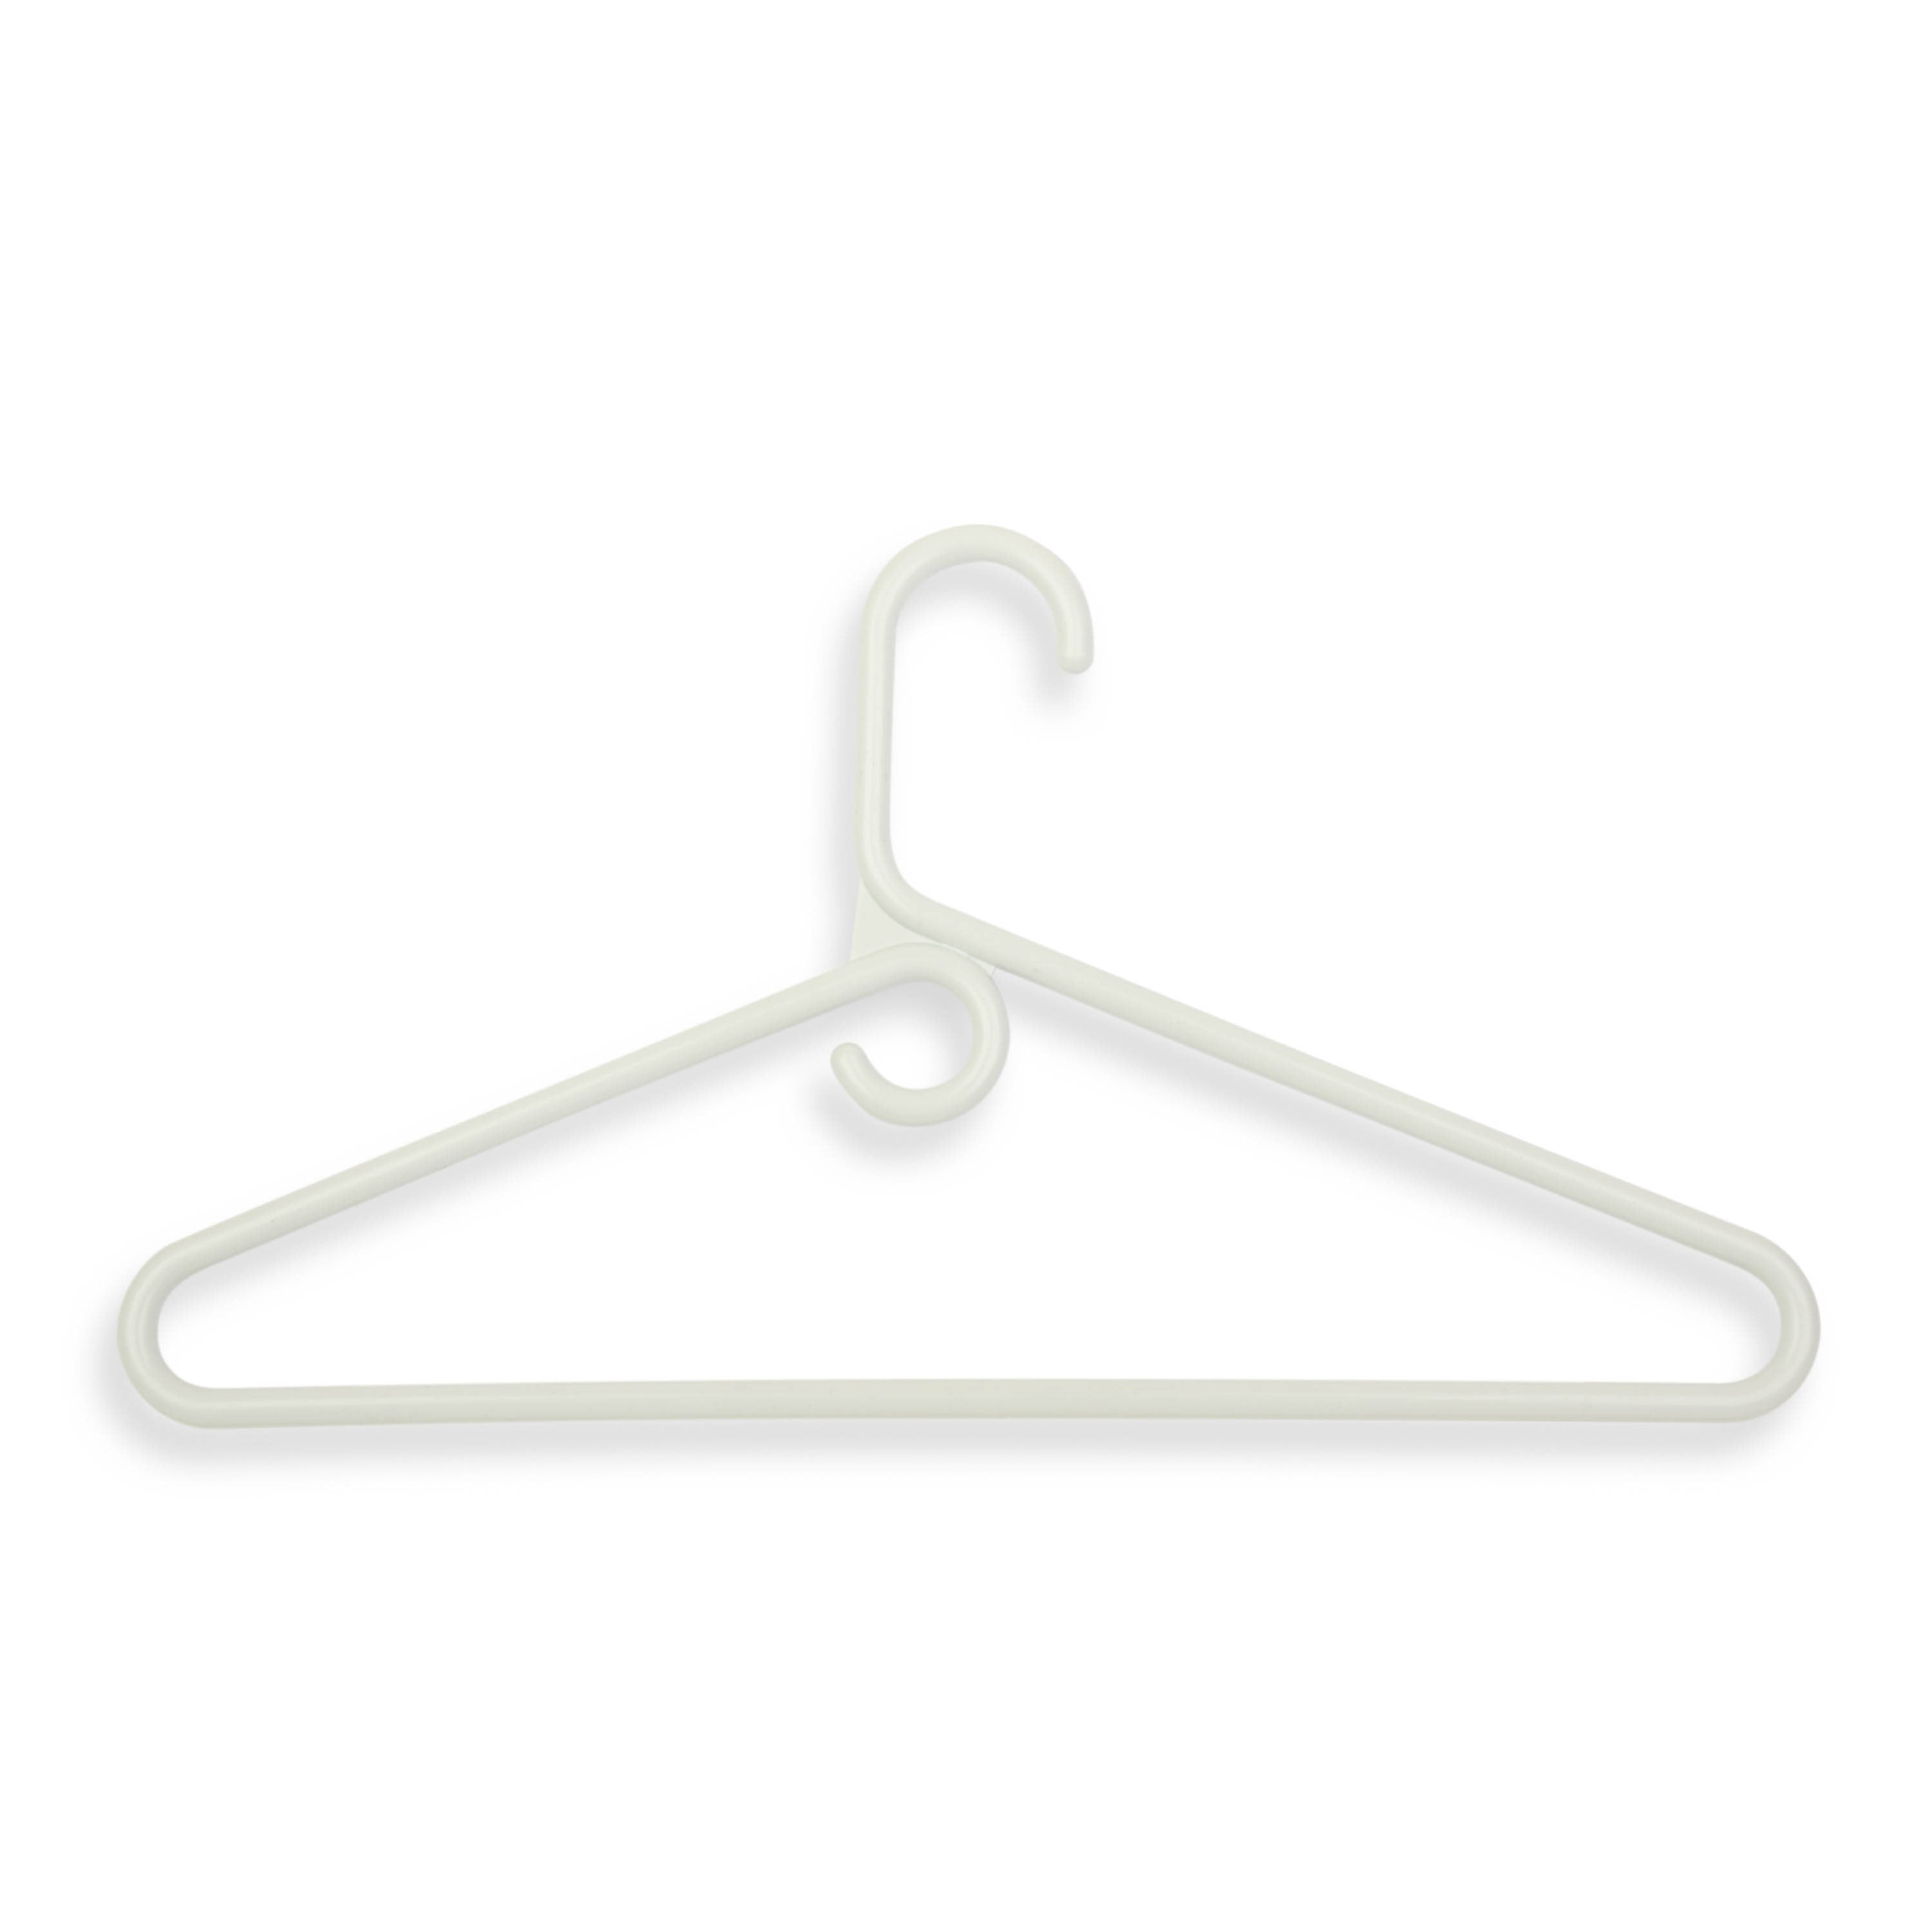 SUPER DEAL 100 Pack White Plastic Hangers with Double Hooks Standard Thick  Clothes Hangers for Closet Coat Shirts Pants Dresses Heavy Duty Lightweight